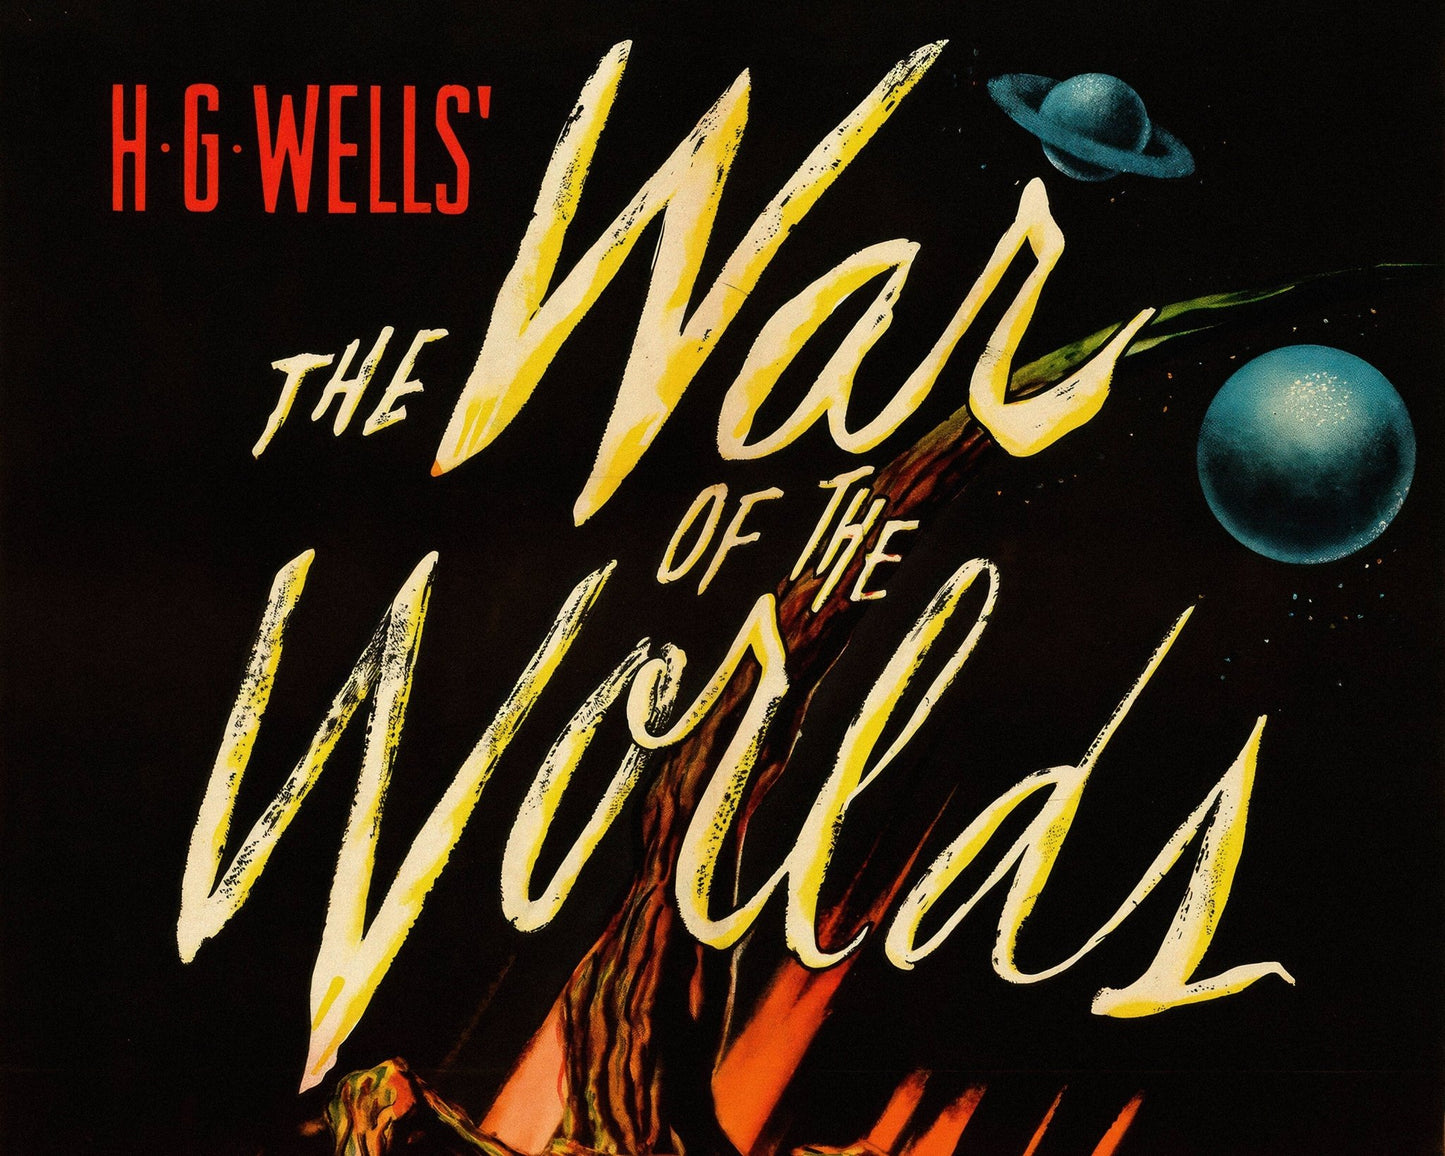 H.G Wells "The War of The Worlds" (1953) - Mabon Gallery